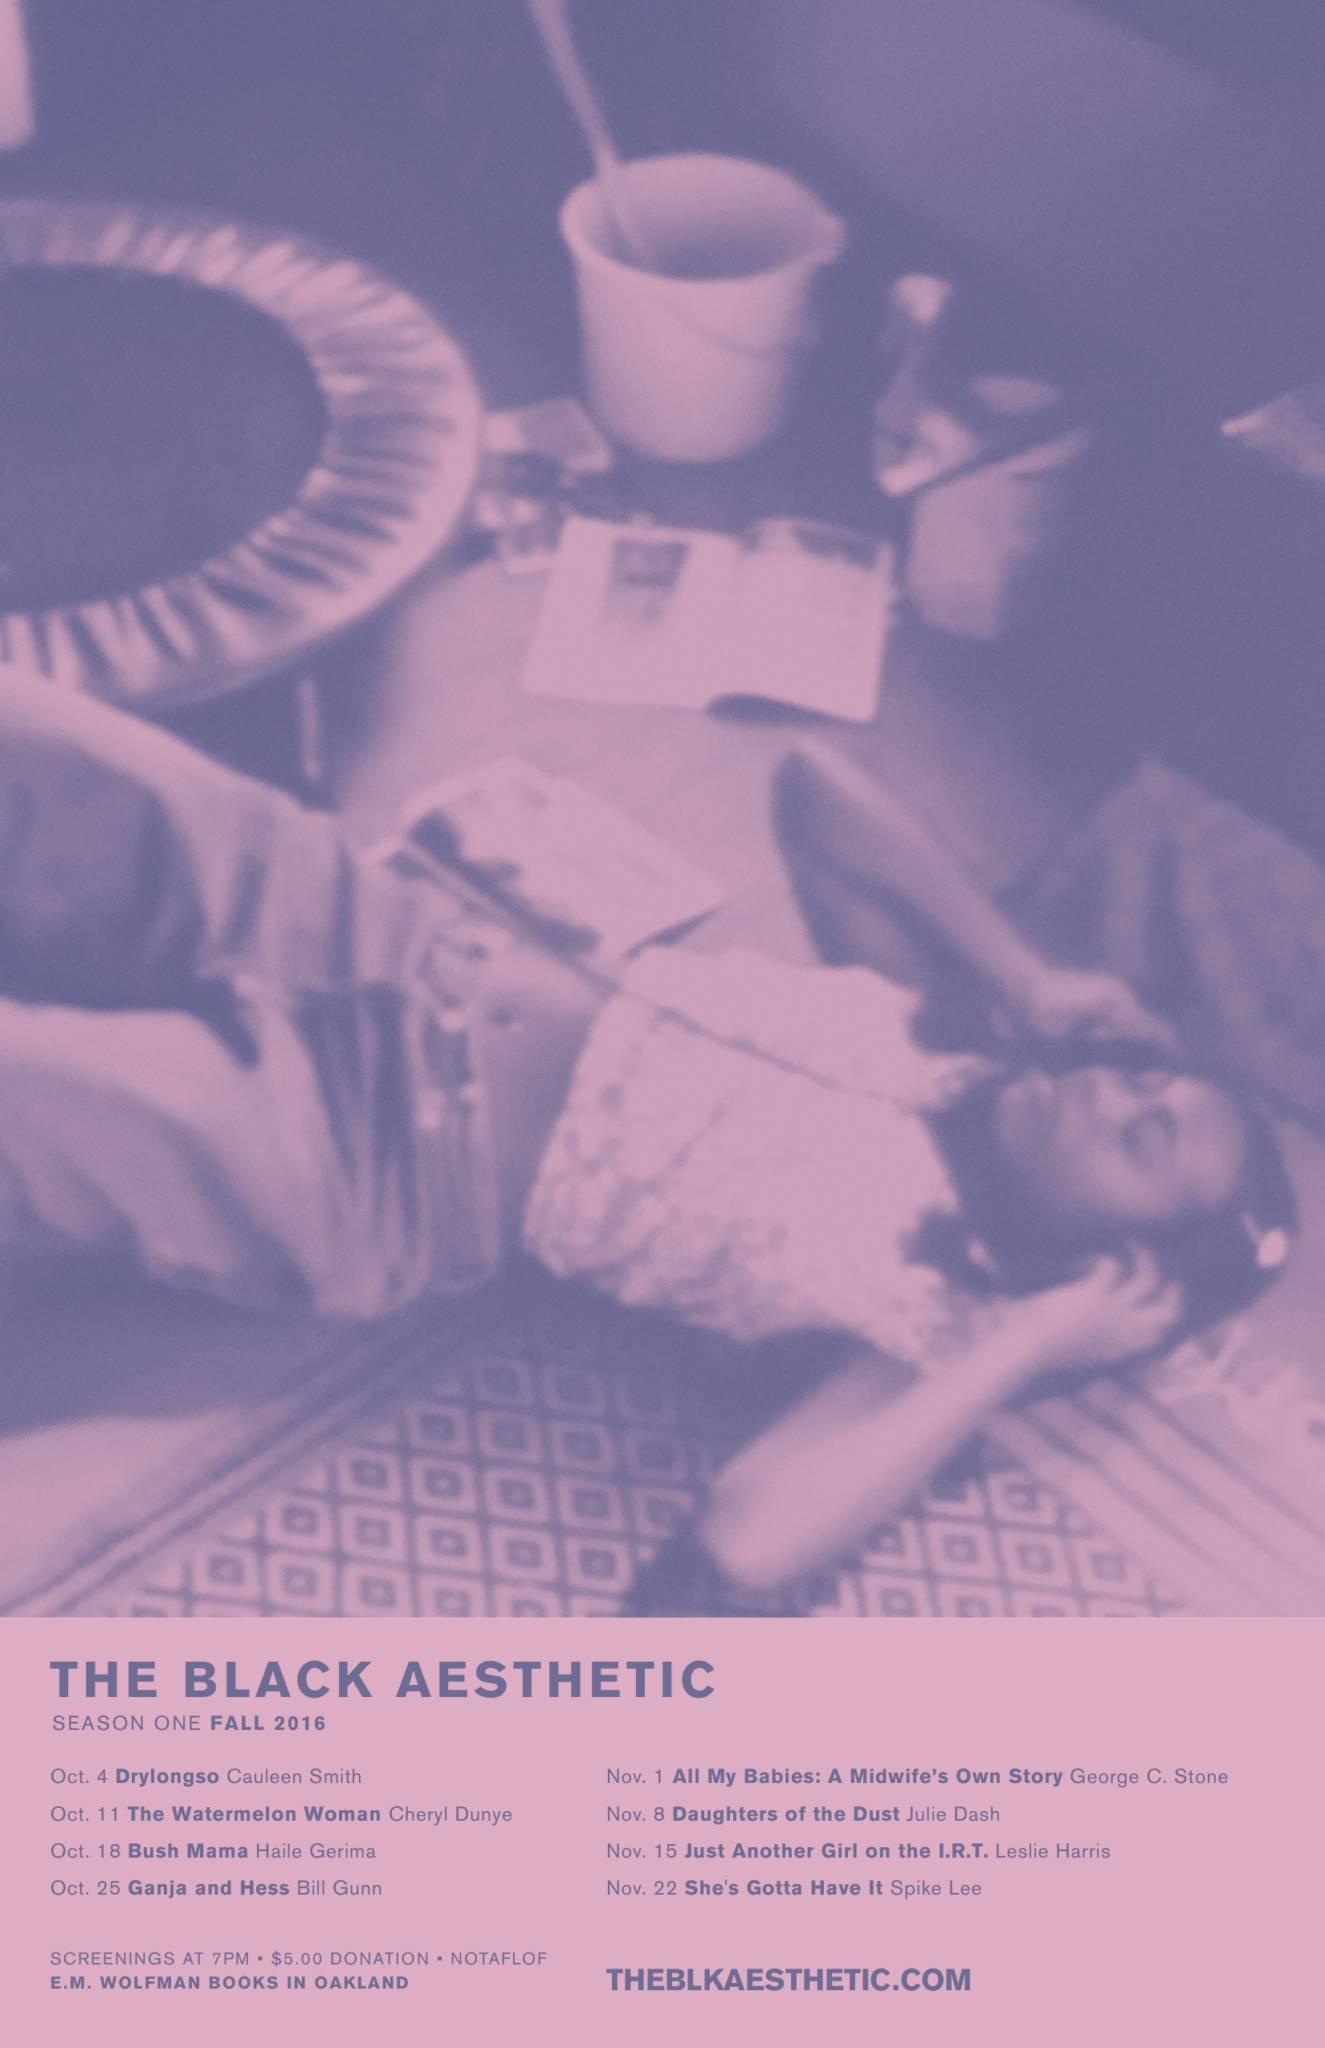 Poster from the first season of The Black Aesthetic film series.